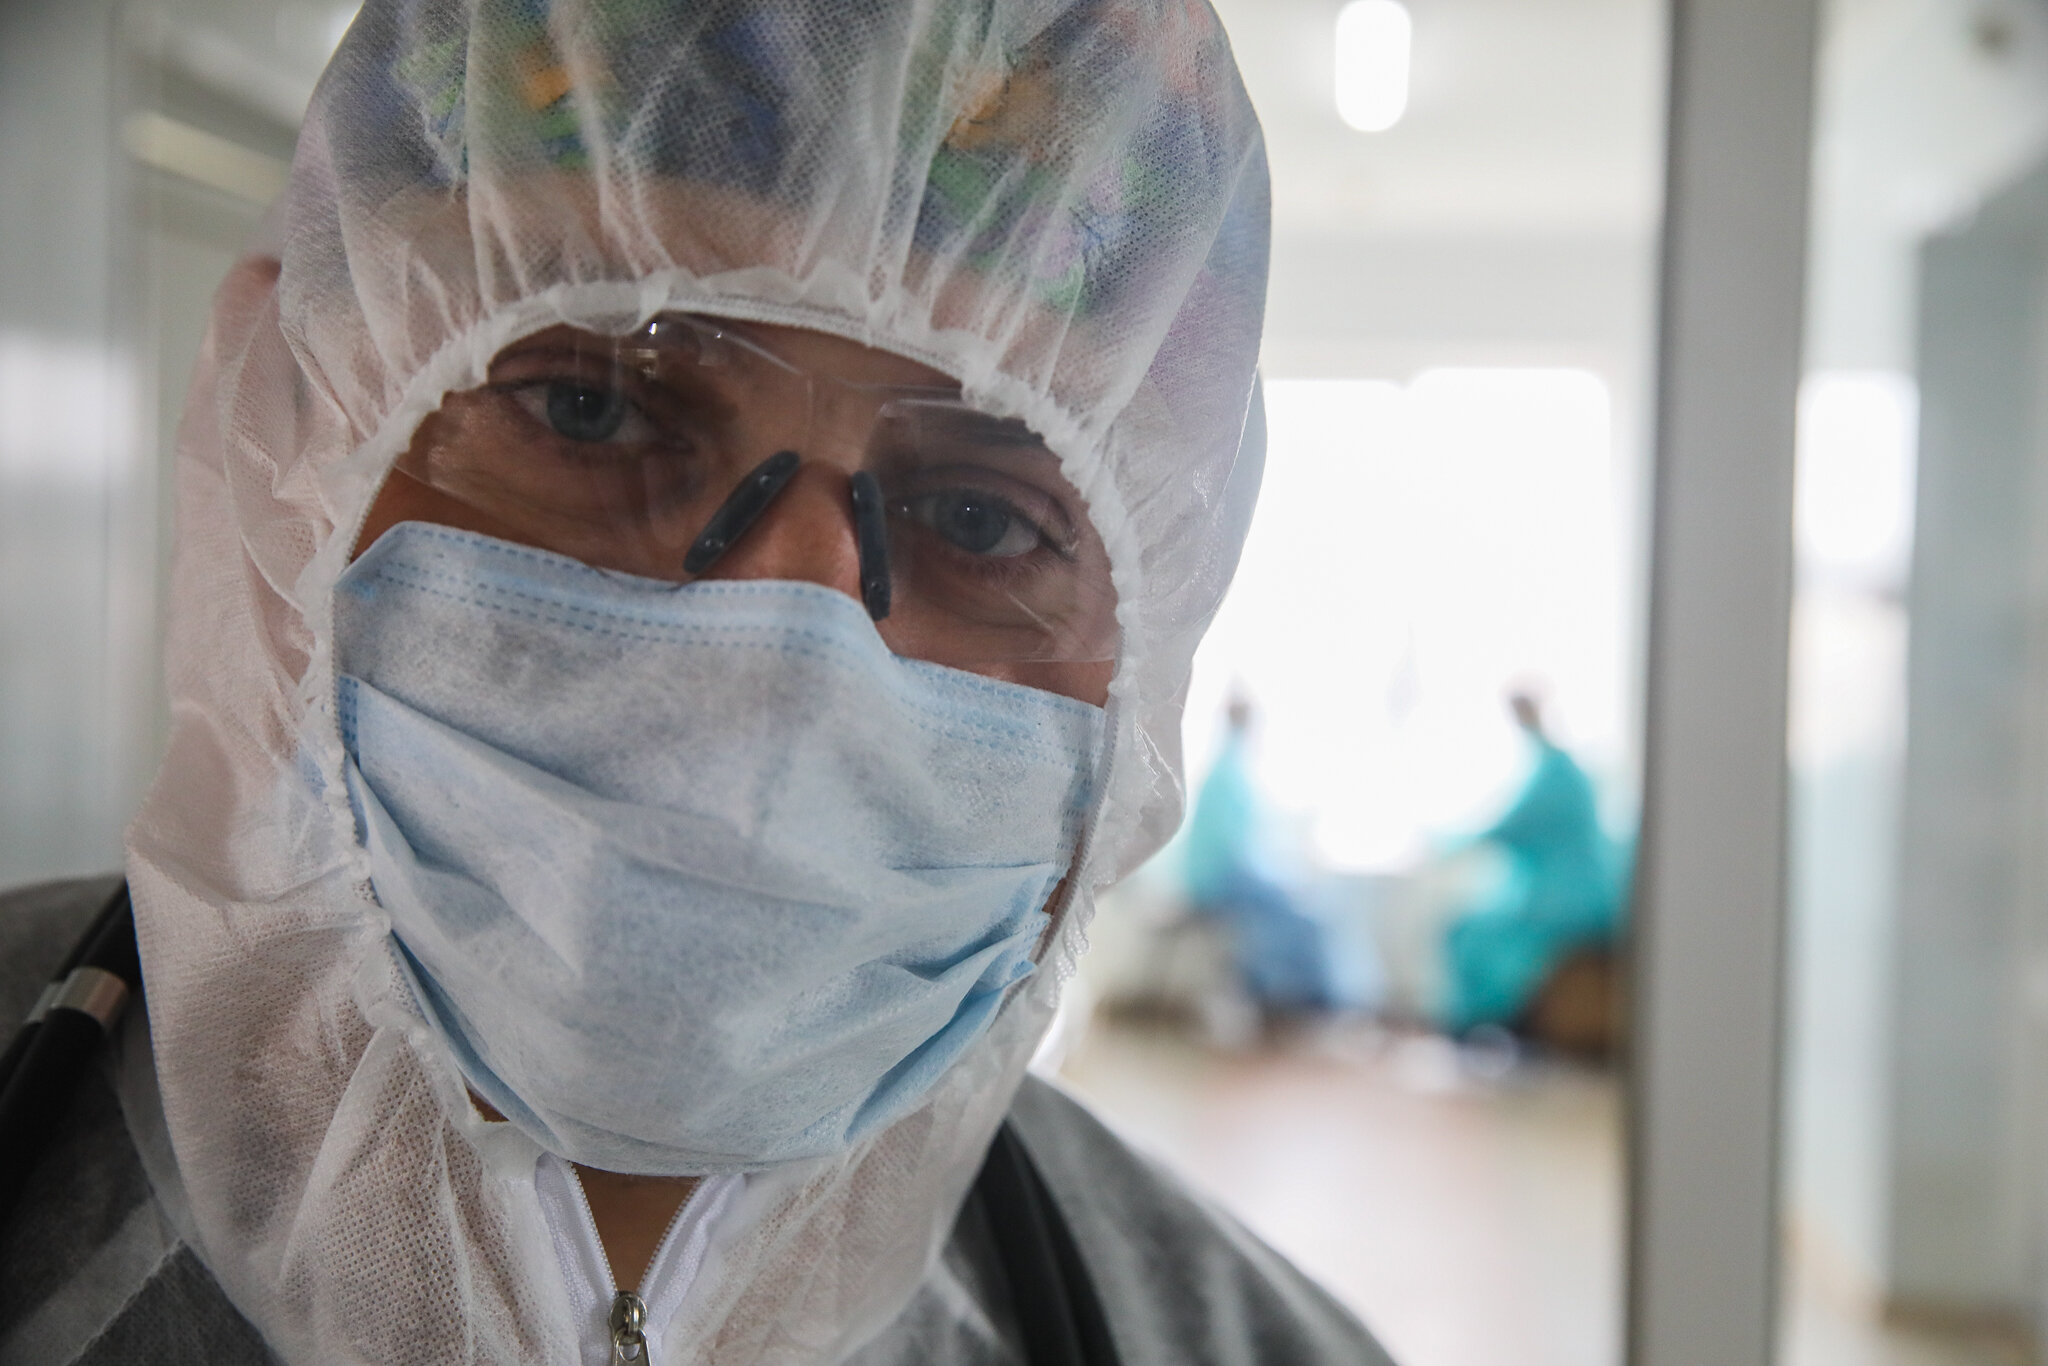 Vitaliy Yakubiyak, an anesthesiologist at Kolomyia District Hospital in Ivano-Frankivsk Oblast, stands in the hallway of intensive care unit for coronavirus patients on March 16, 2021.